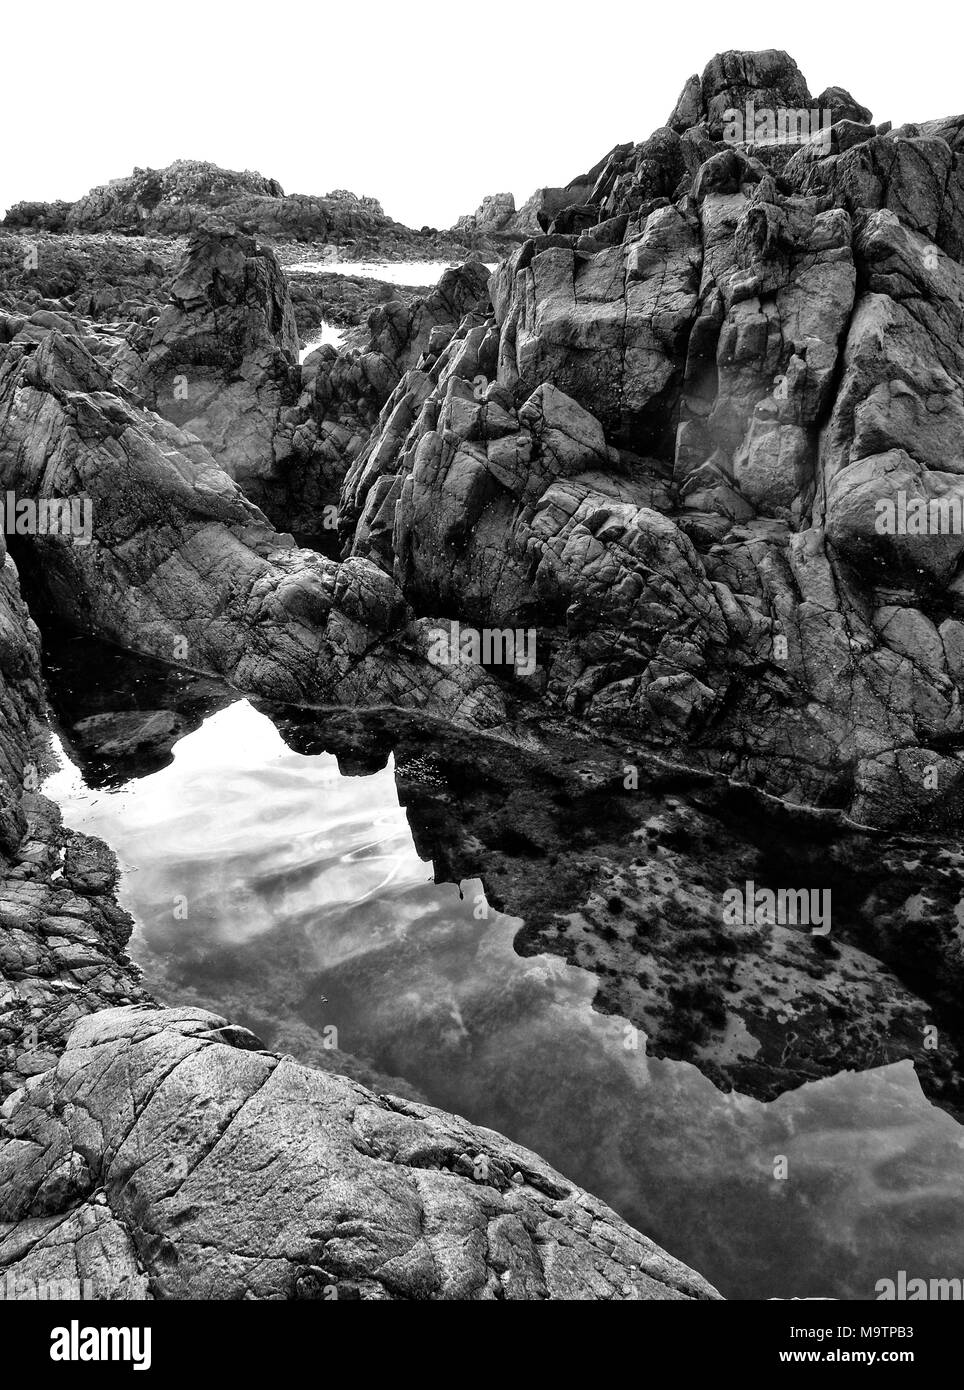 English channel sea wildlife Black and White Stock Photos & Images - Alamy